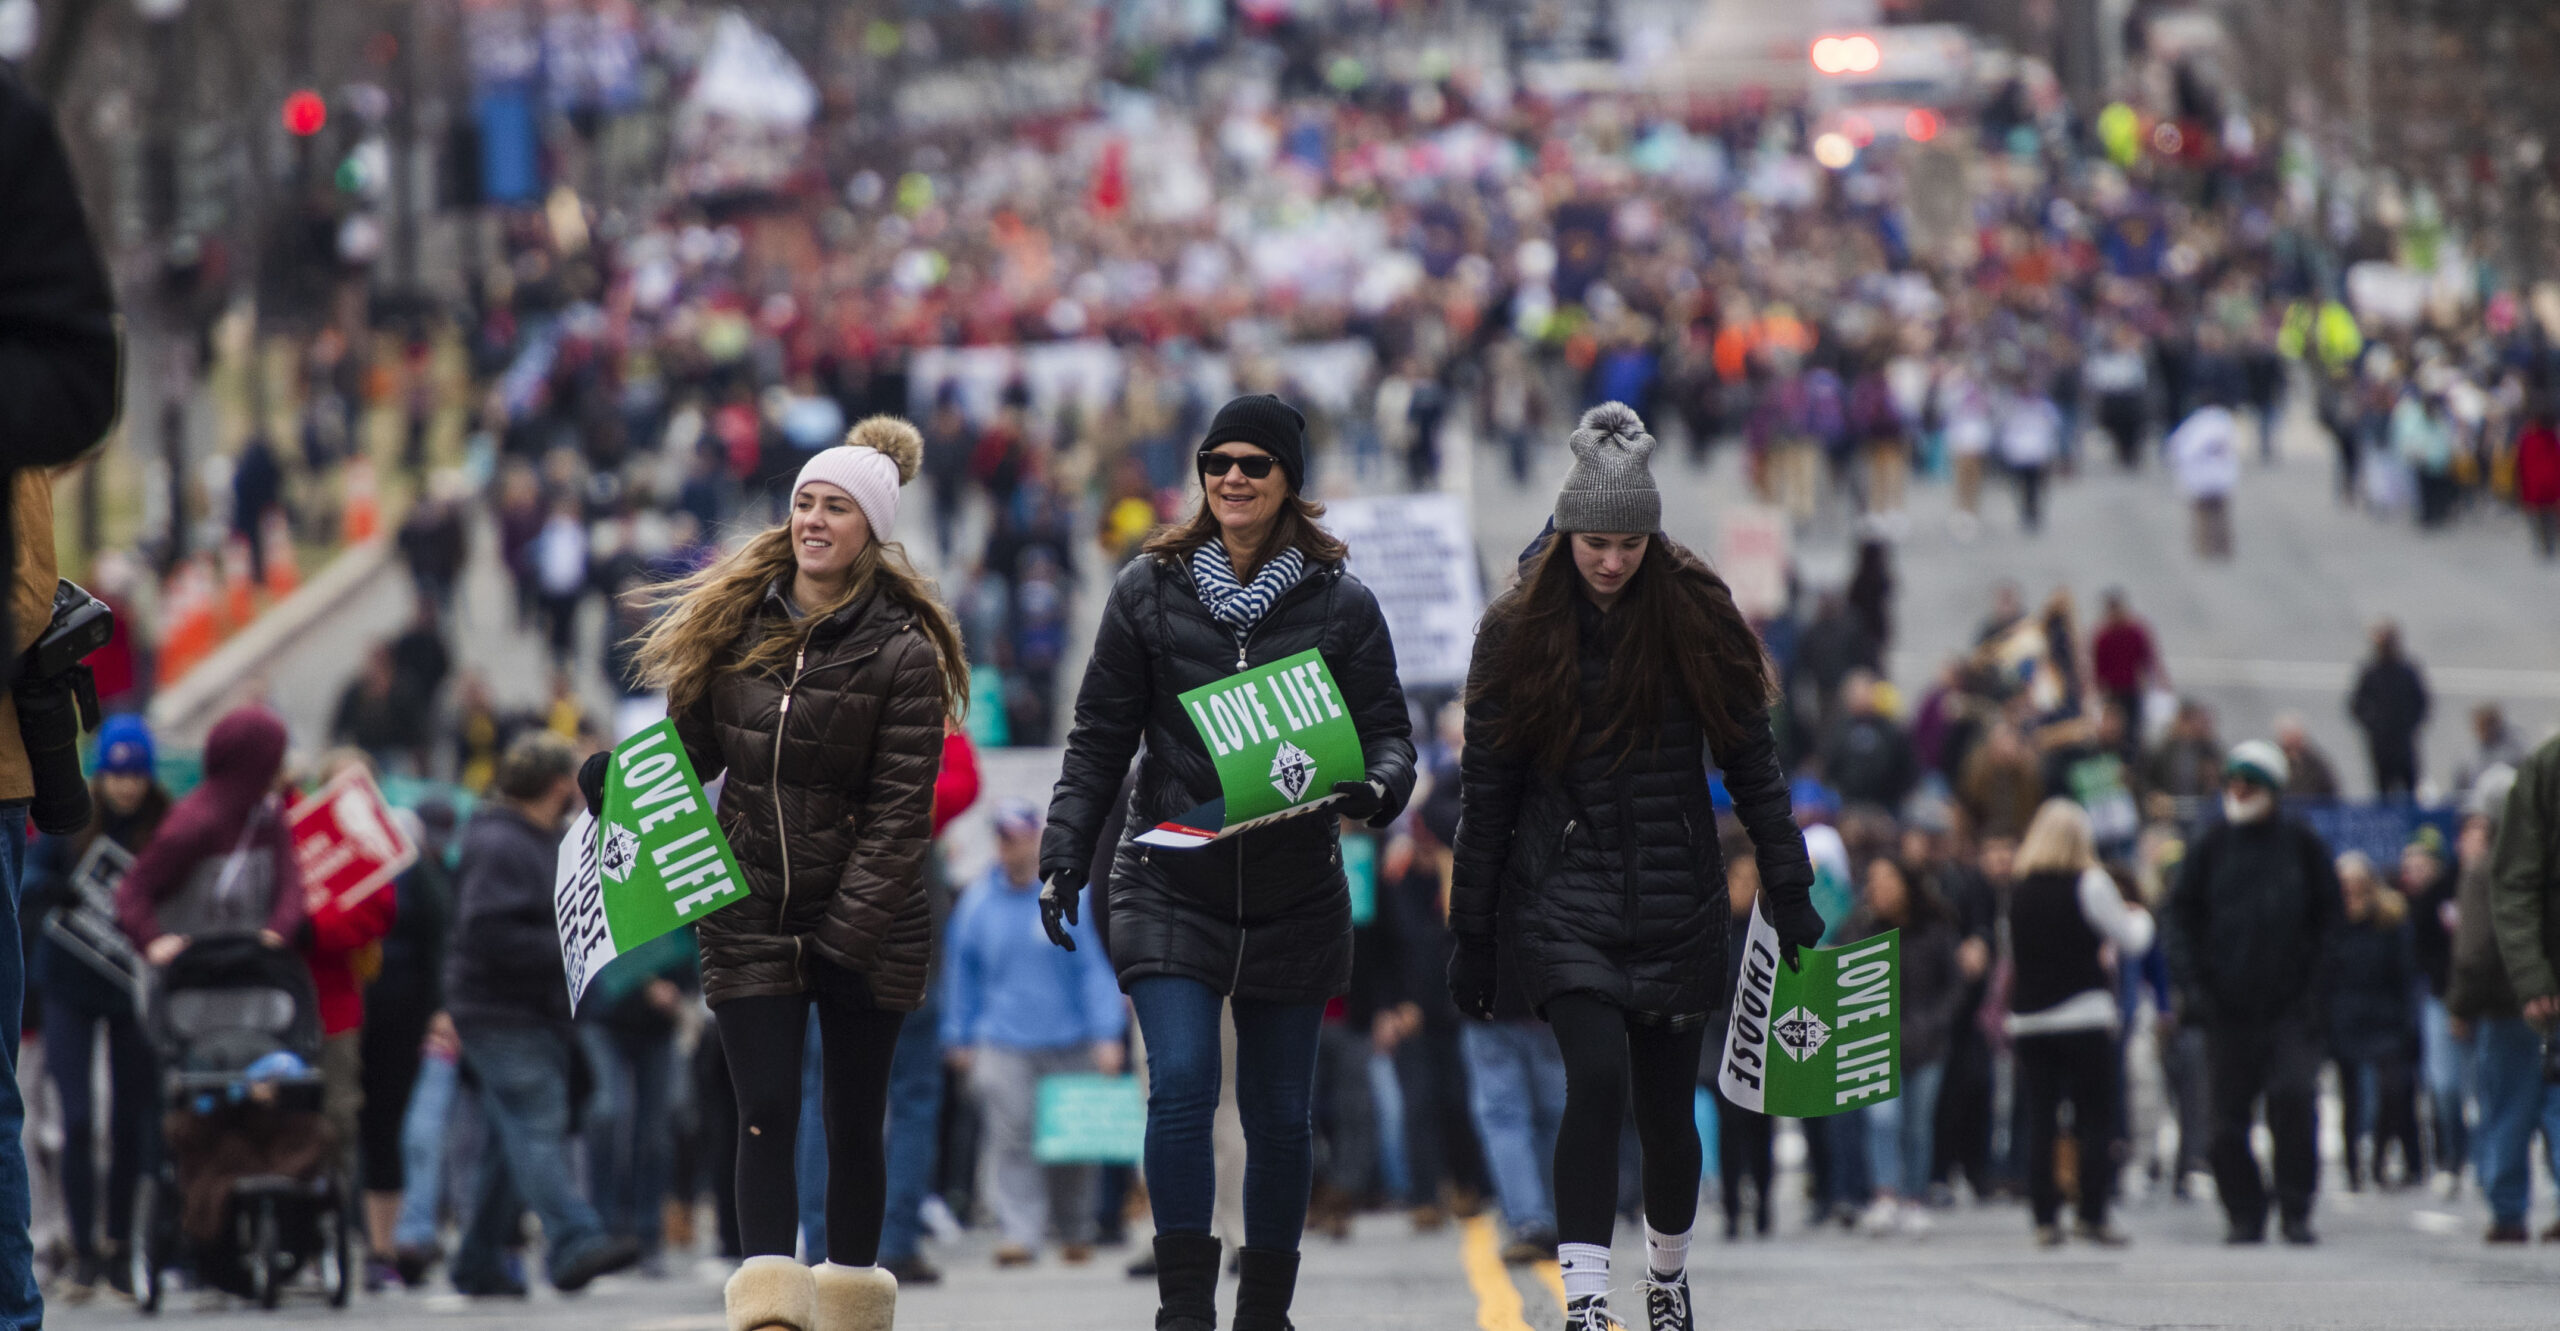 2022 March for Life to ‘Proceed as Planned' Despite DC Vaccine Mandate